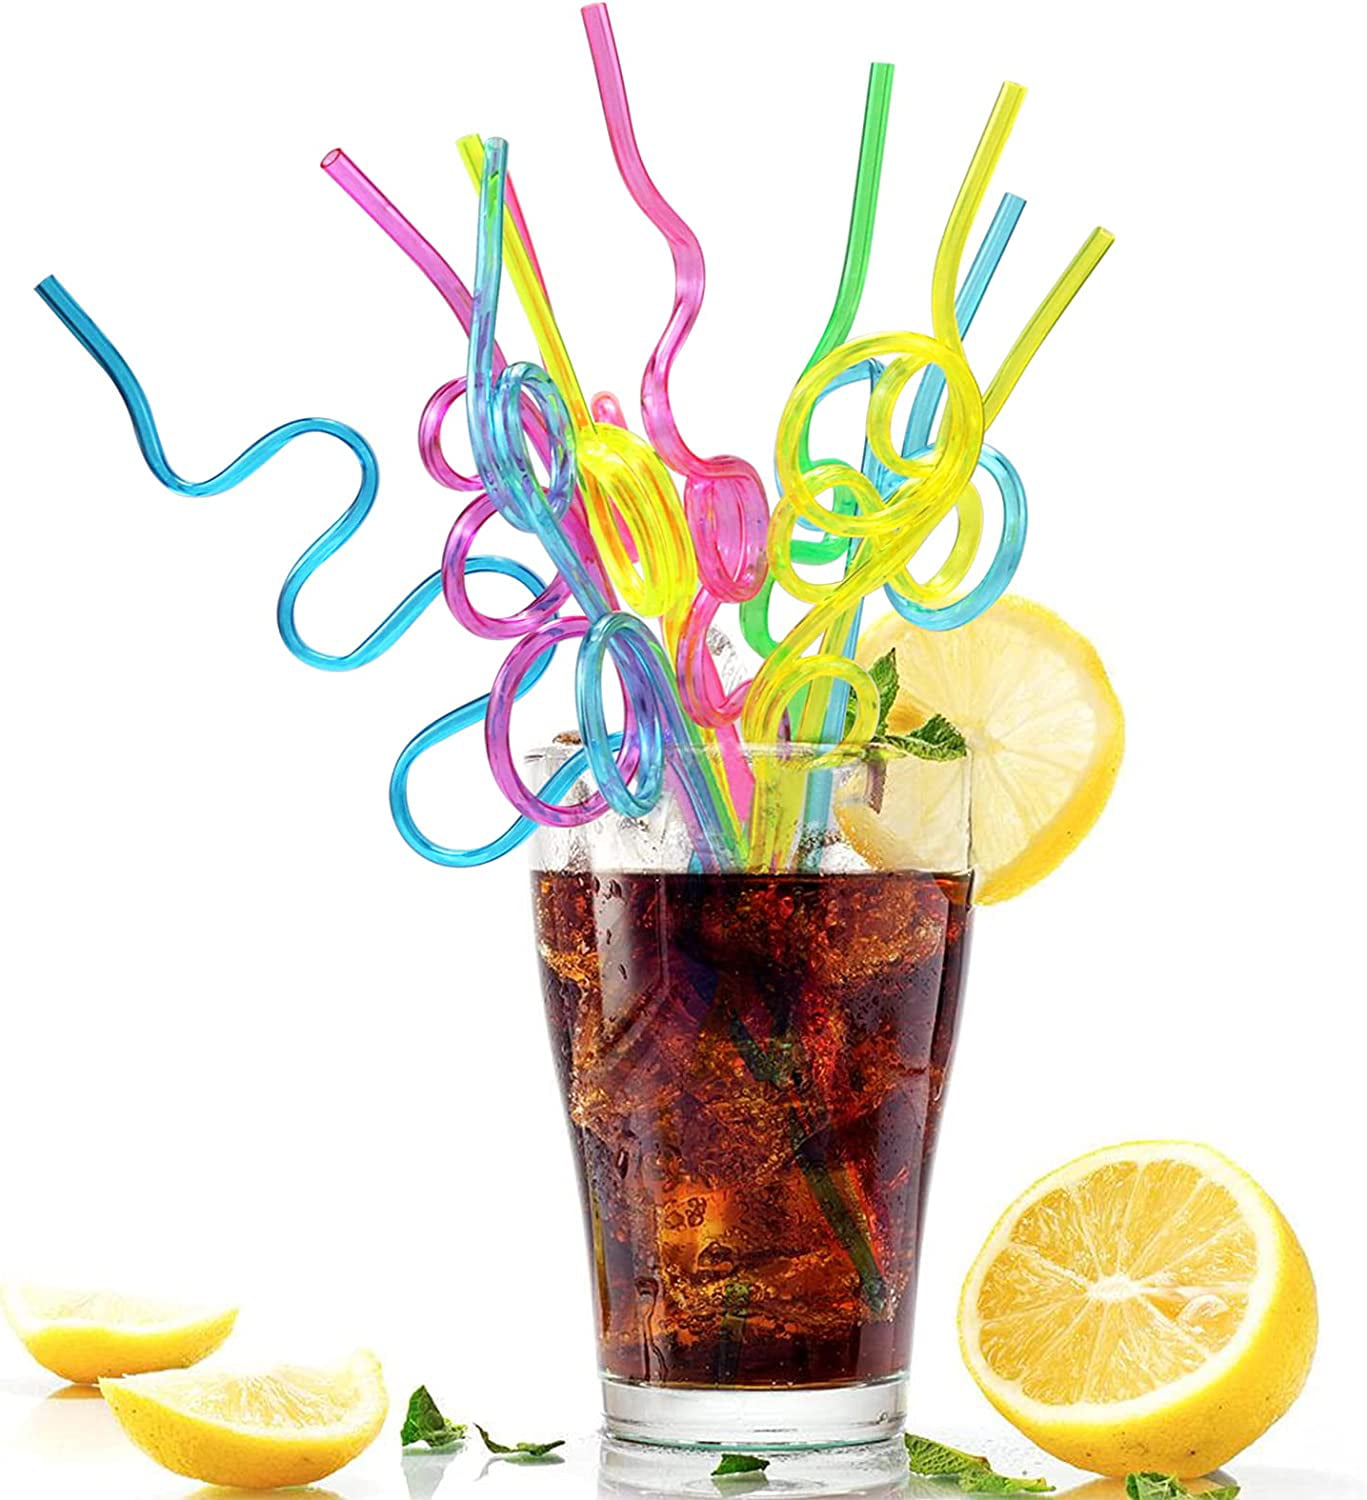 Crazy Straws 20 Pcs Colorful Silly Straws for Kids &Adults,Reusable Plastic  Loop Crazy 15 Assorted Fun Curly Drinking Straws for Classroom Activities  Valentines Day Gift Christmas Birthday Party Wedd 